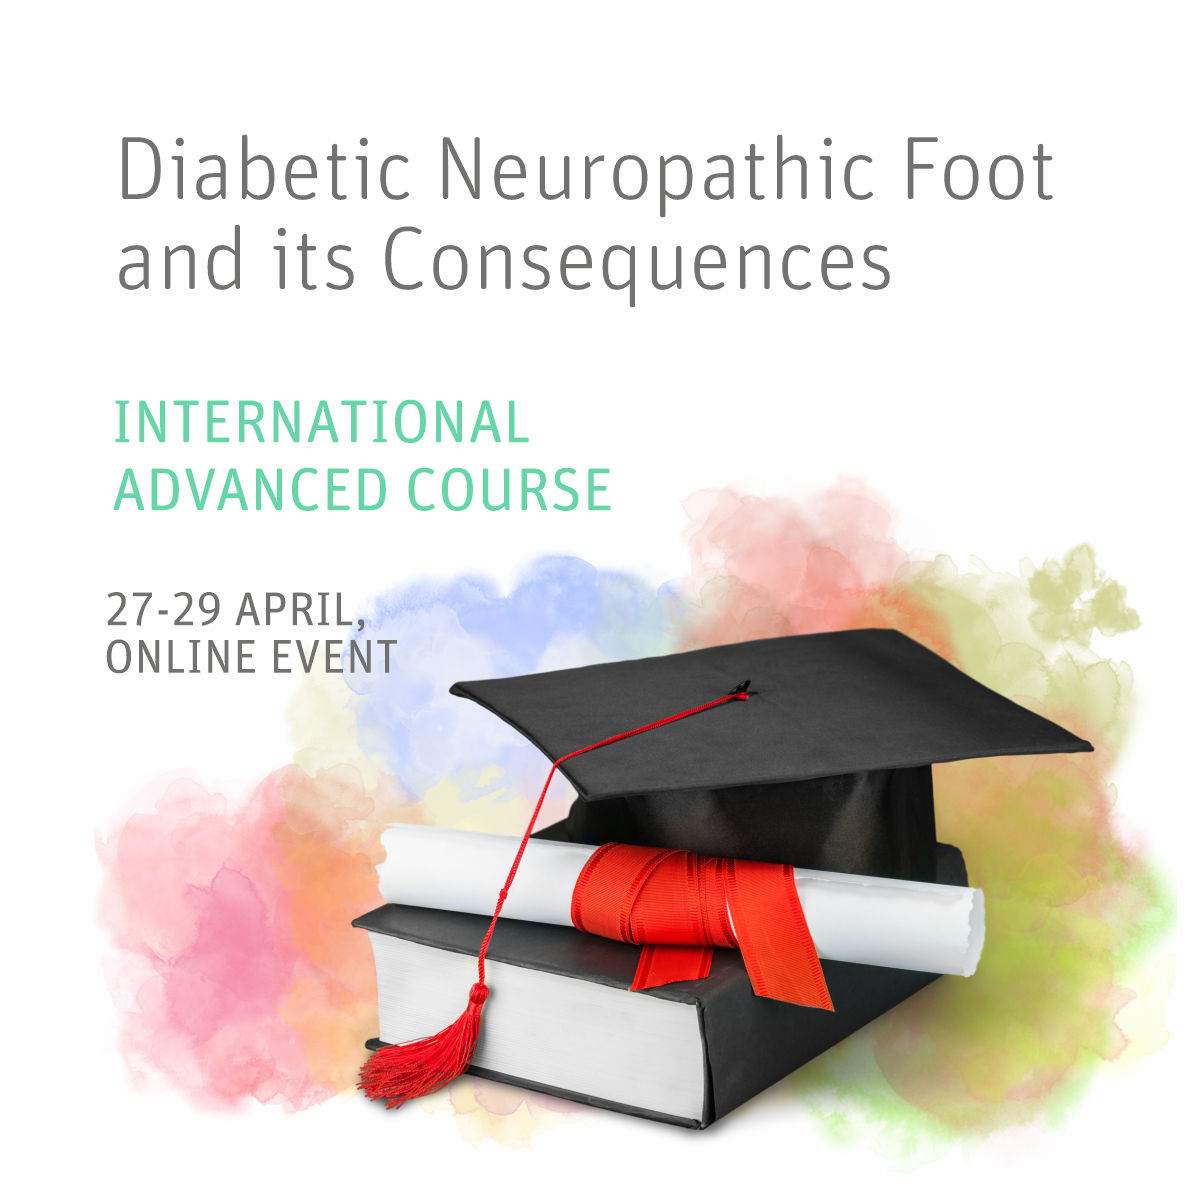 1st International Advanced Course of Diabetic Neuropathic Foot and its Consequences